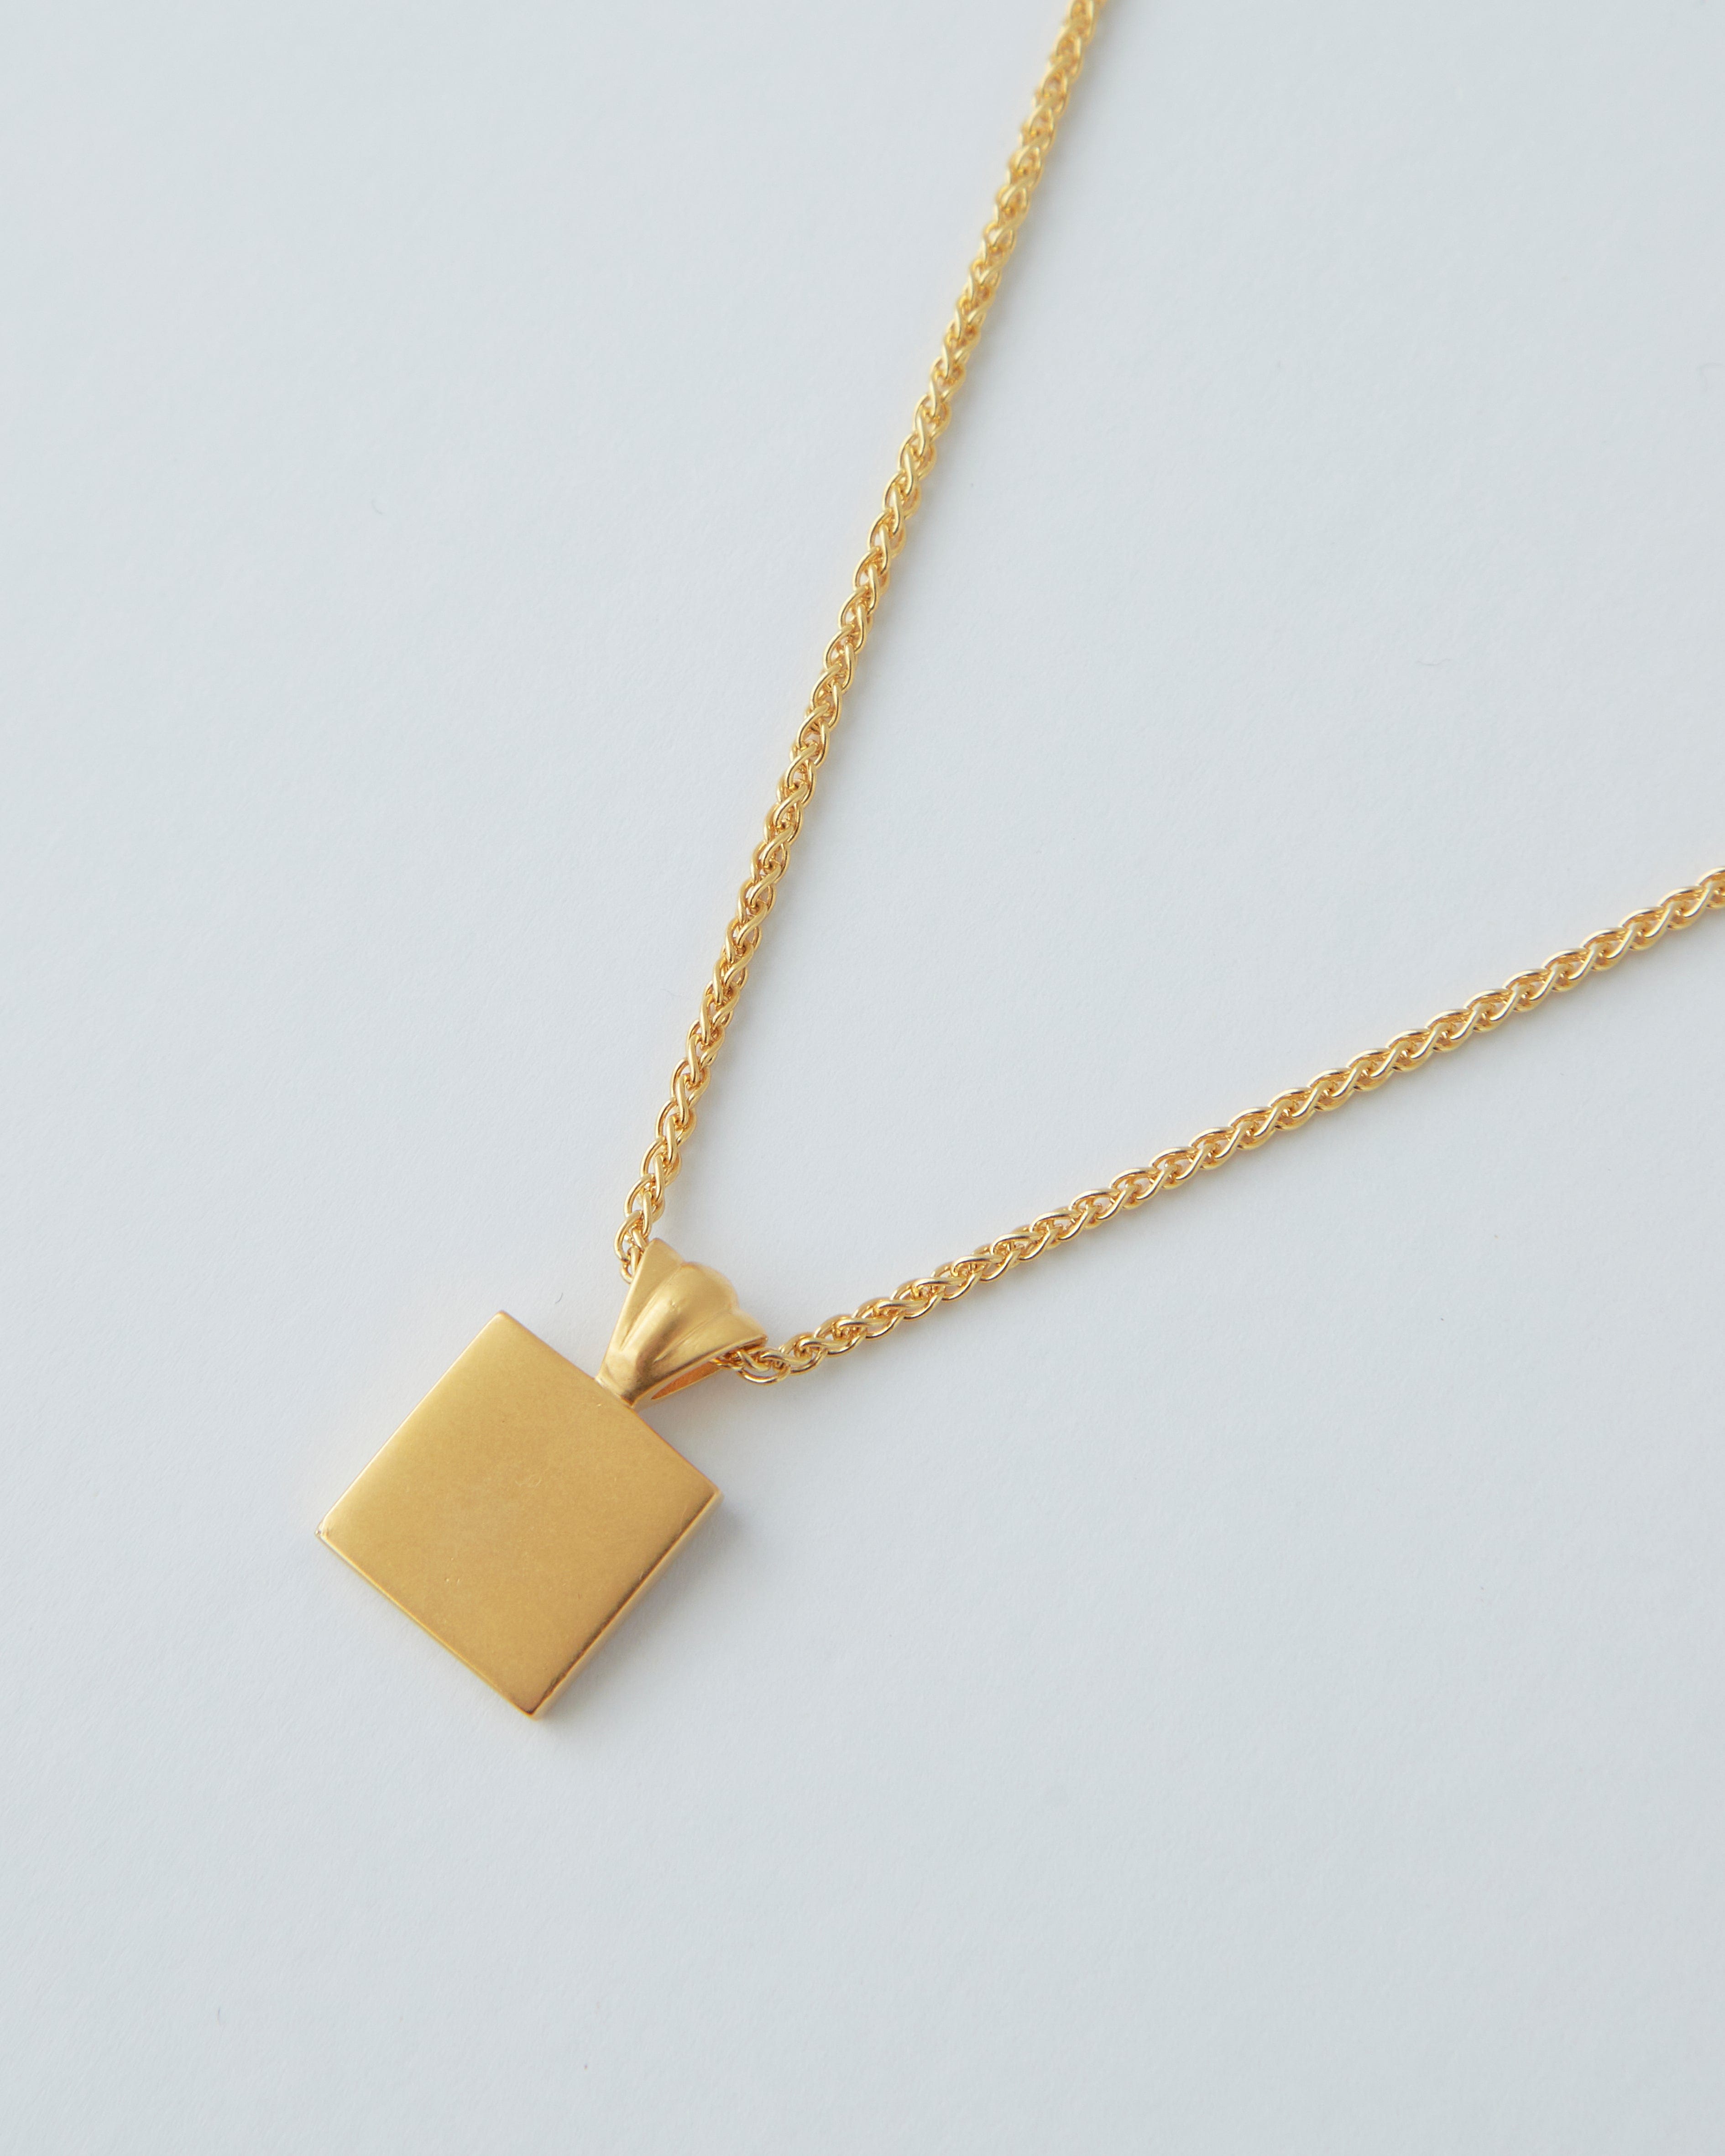 Dear Letterman Necklace Matin Gold Necklace